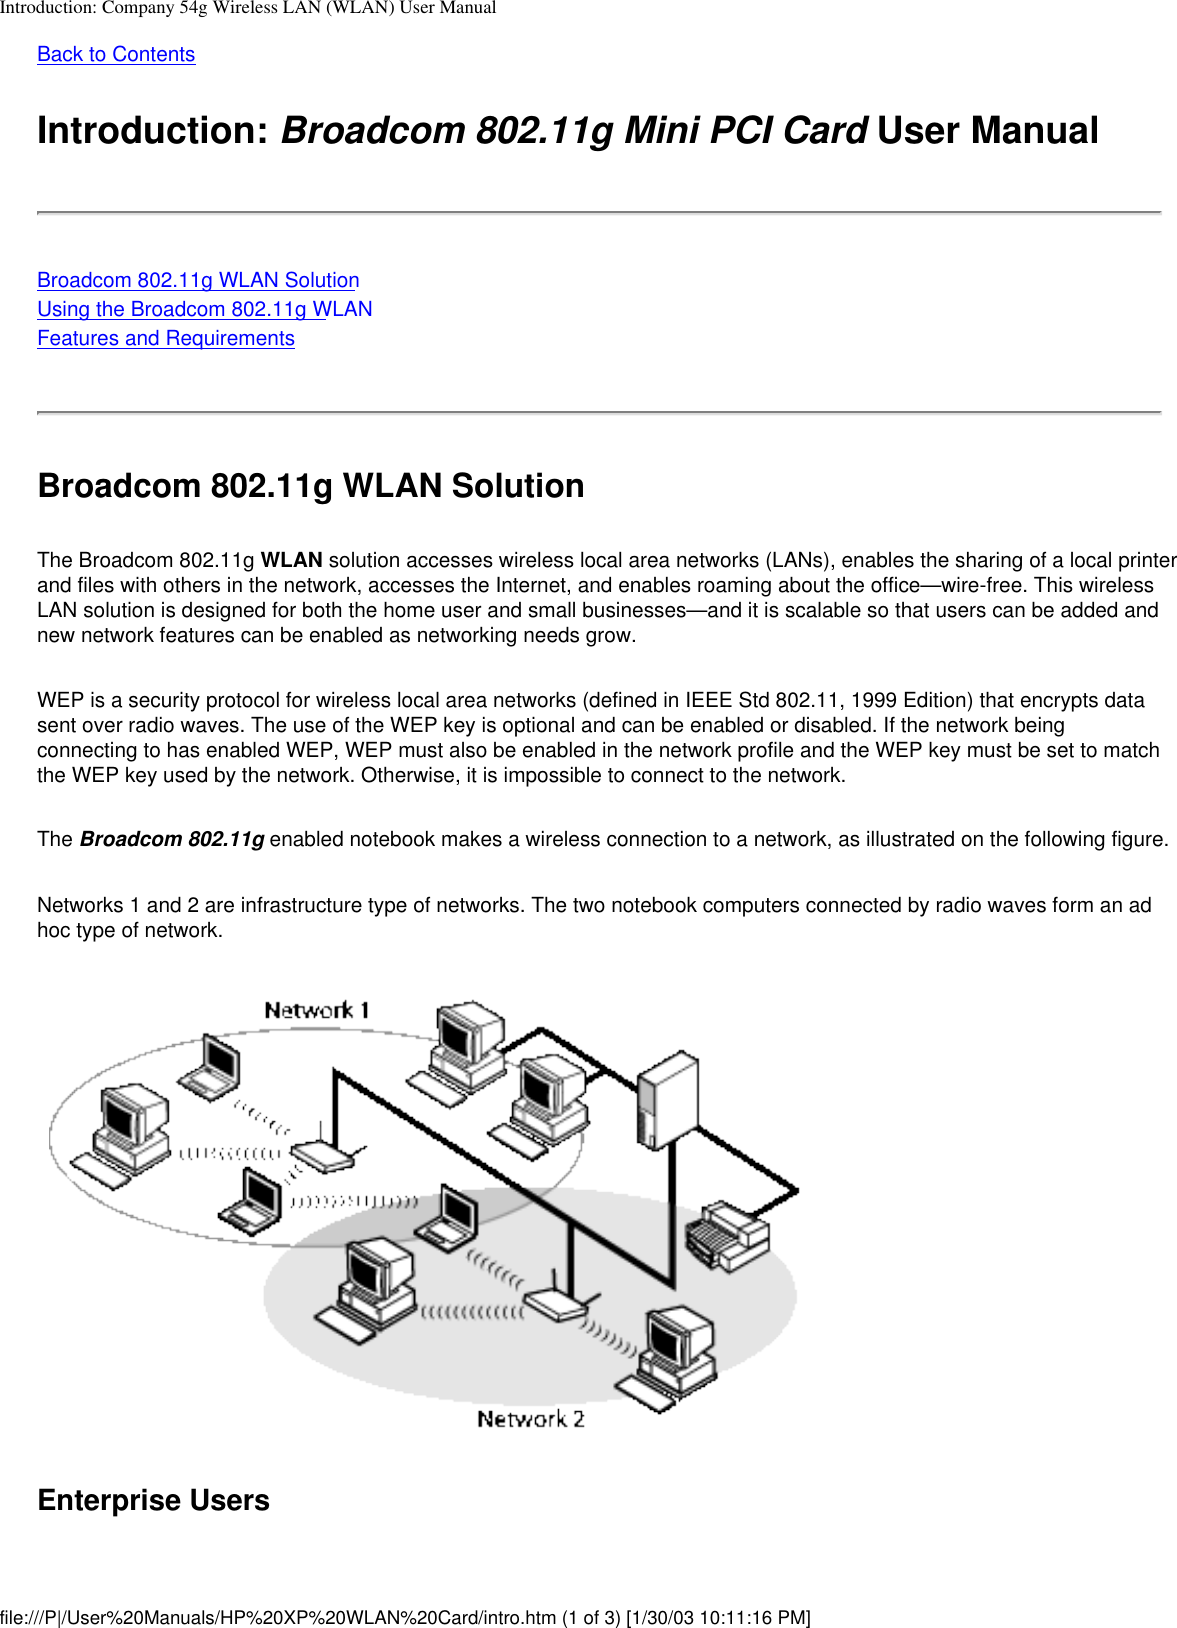 Introduction: Company 54g Wireless LAN (WLAN) User ManualBack to ContentsIntroduction: Broadcom 802.11g Mini PCI Card User ManualBroadcom 802.11g WLAN SolutionUsing the Broadcom 802.11g WLANFeatures and RequirementsBroadcom 802.11g WLAN SolutionThe Broadcom 802.11g WLAN solution accesses wireless local area networks (LANs), enables the sharing of a local printer and files with others in the network, accesses the Internet, and enables roaming about the office—wire-free. This wireless LAN solution is designed for both the home user and small businesses—and it is scalable so that users can be added and new network features can be enabled as networking needs grow.WEP is a security protocol for wireless local area networks (defined in IEEE Std 802.11, 1999 Edition) that encrypts data sent over radio waves. The use of the WEP key is optional and can be enabled or disabled. If the network being connecting to has enabled WEP, WEP must also be enabled in the network profile and the WEP key must be set to match the WEP key used by the network. Otherwise, it is impossible to connect to the network.The Broadcom 802.11g enabled notebook makes a wireless connection to a network, as illustrated on the following figure.Networks 1 and 2 are infrastructure type of networks. The two notebook computers connected by radio waves form an ad hoc type of network.Enterprise Usersfile:///P|/User%20Manuals/HP%20XP%20WLAN%20Card/intro.htm (1 of 3) [1/30/03 10:11:16 PM]